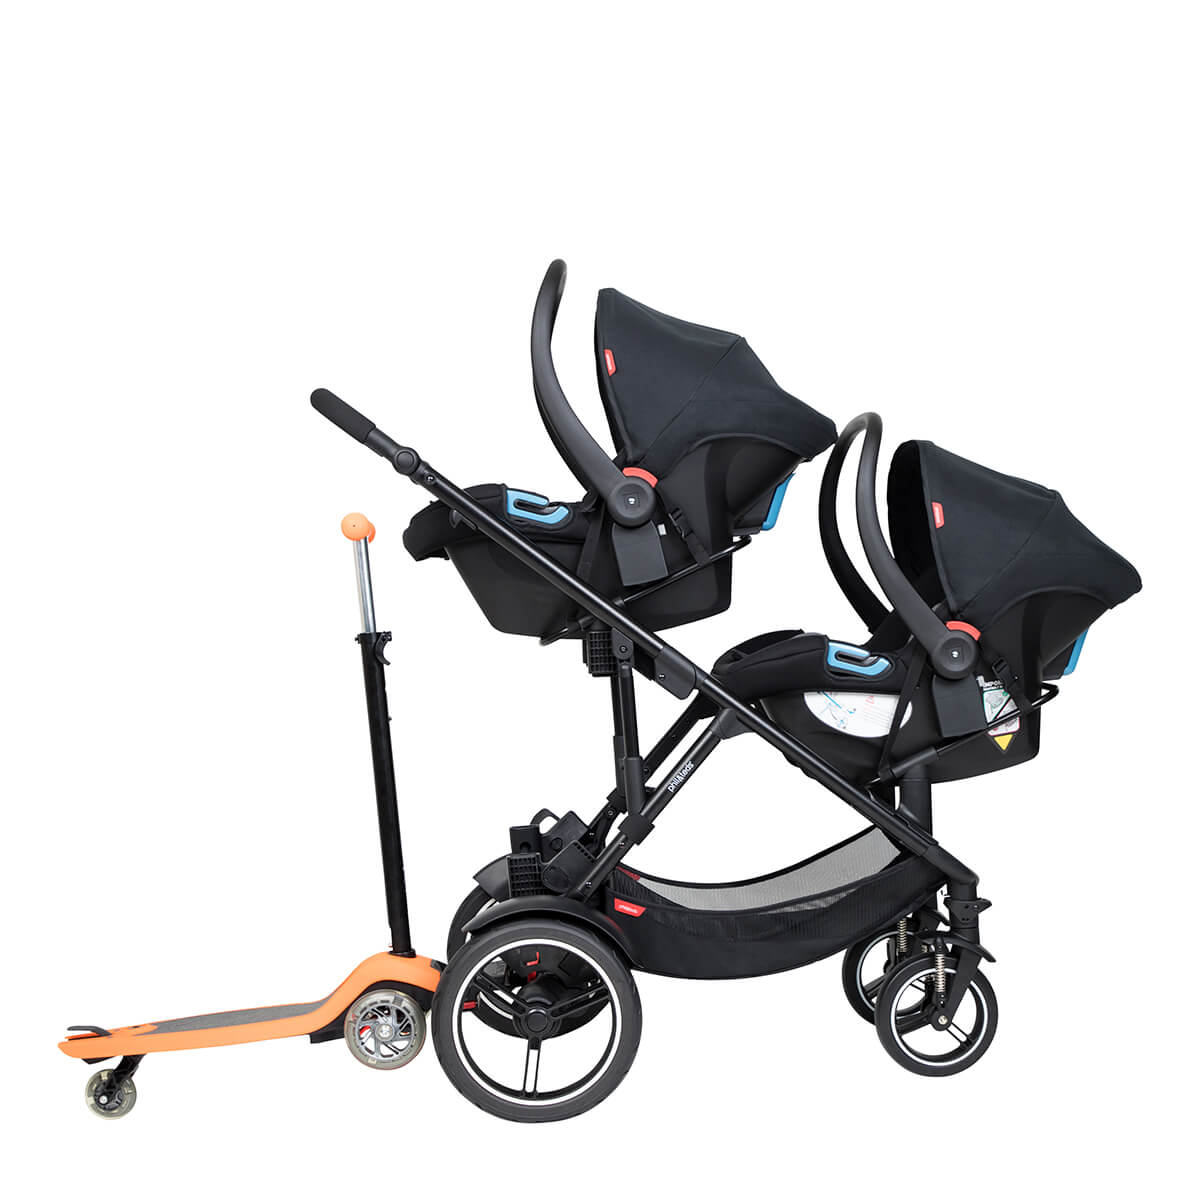 https://cdn.accentuate.io/8582364365139/19272835367000/philteds-voyager-poussette-with-double-travel-systems-and-freerider-stroller-board-in-the-rear-v1700698749721.jpg?1200x1200